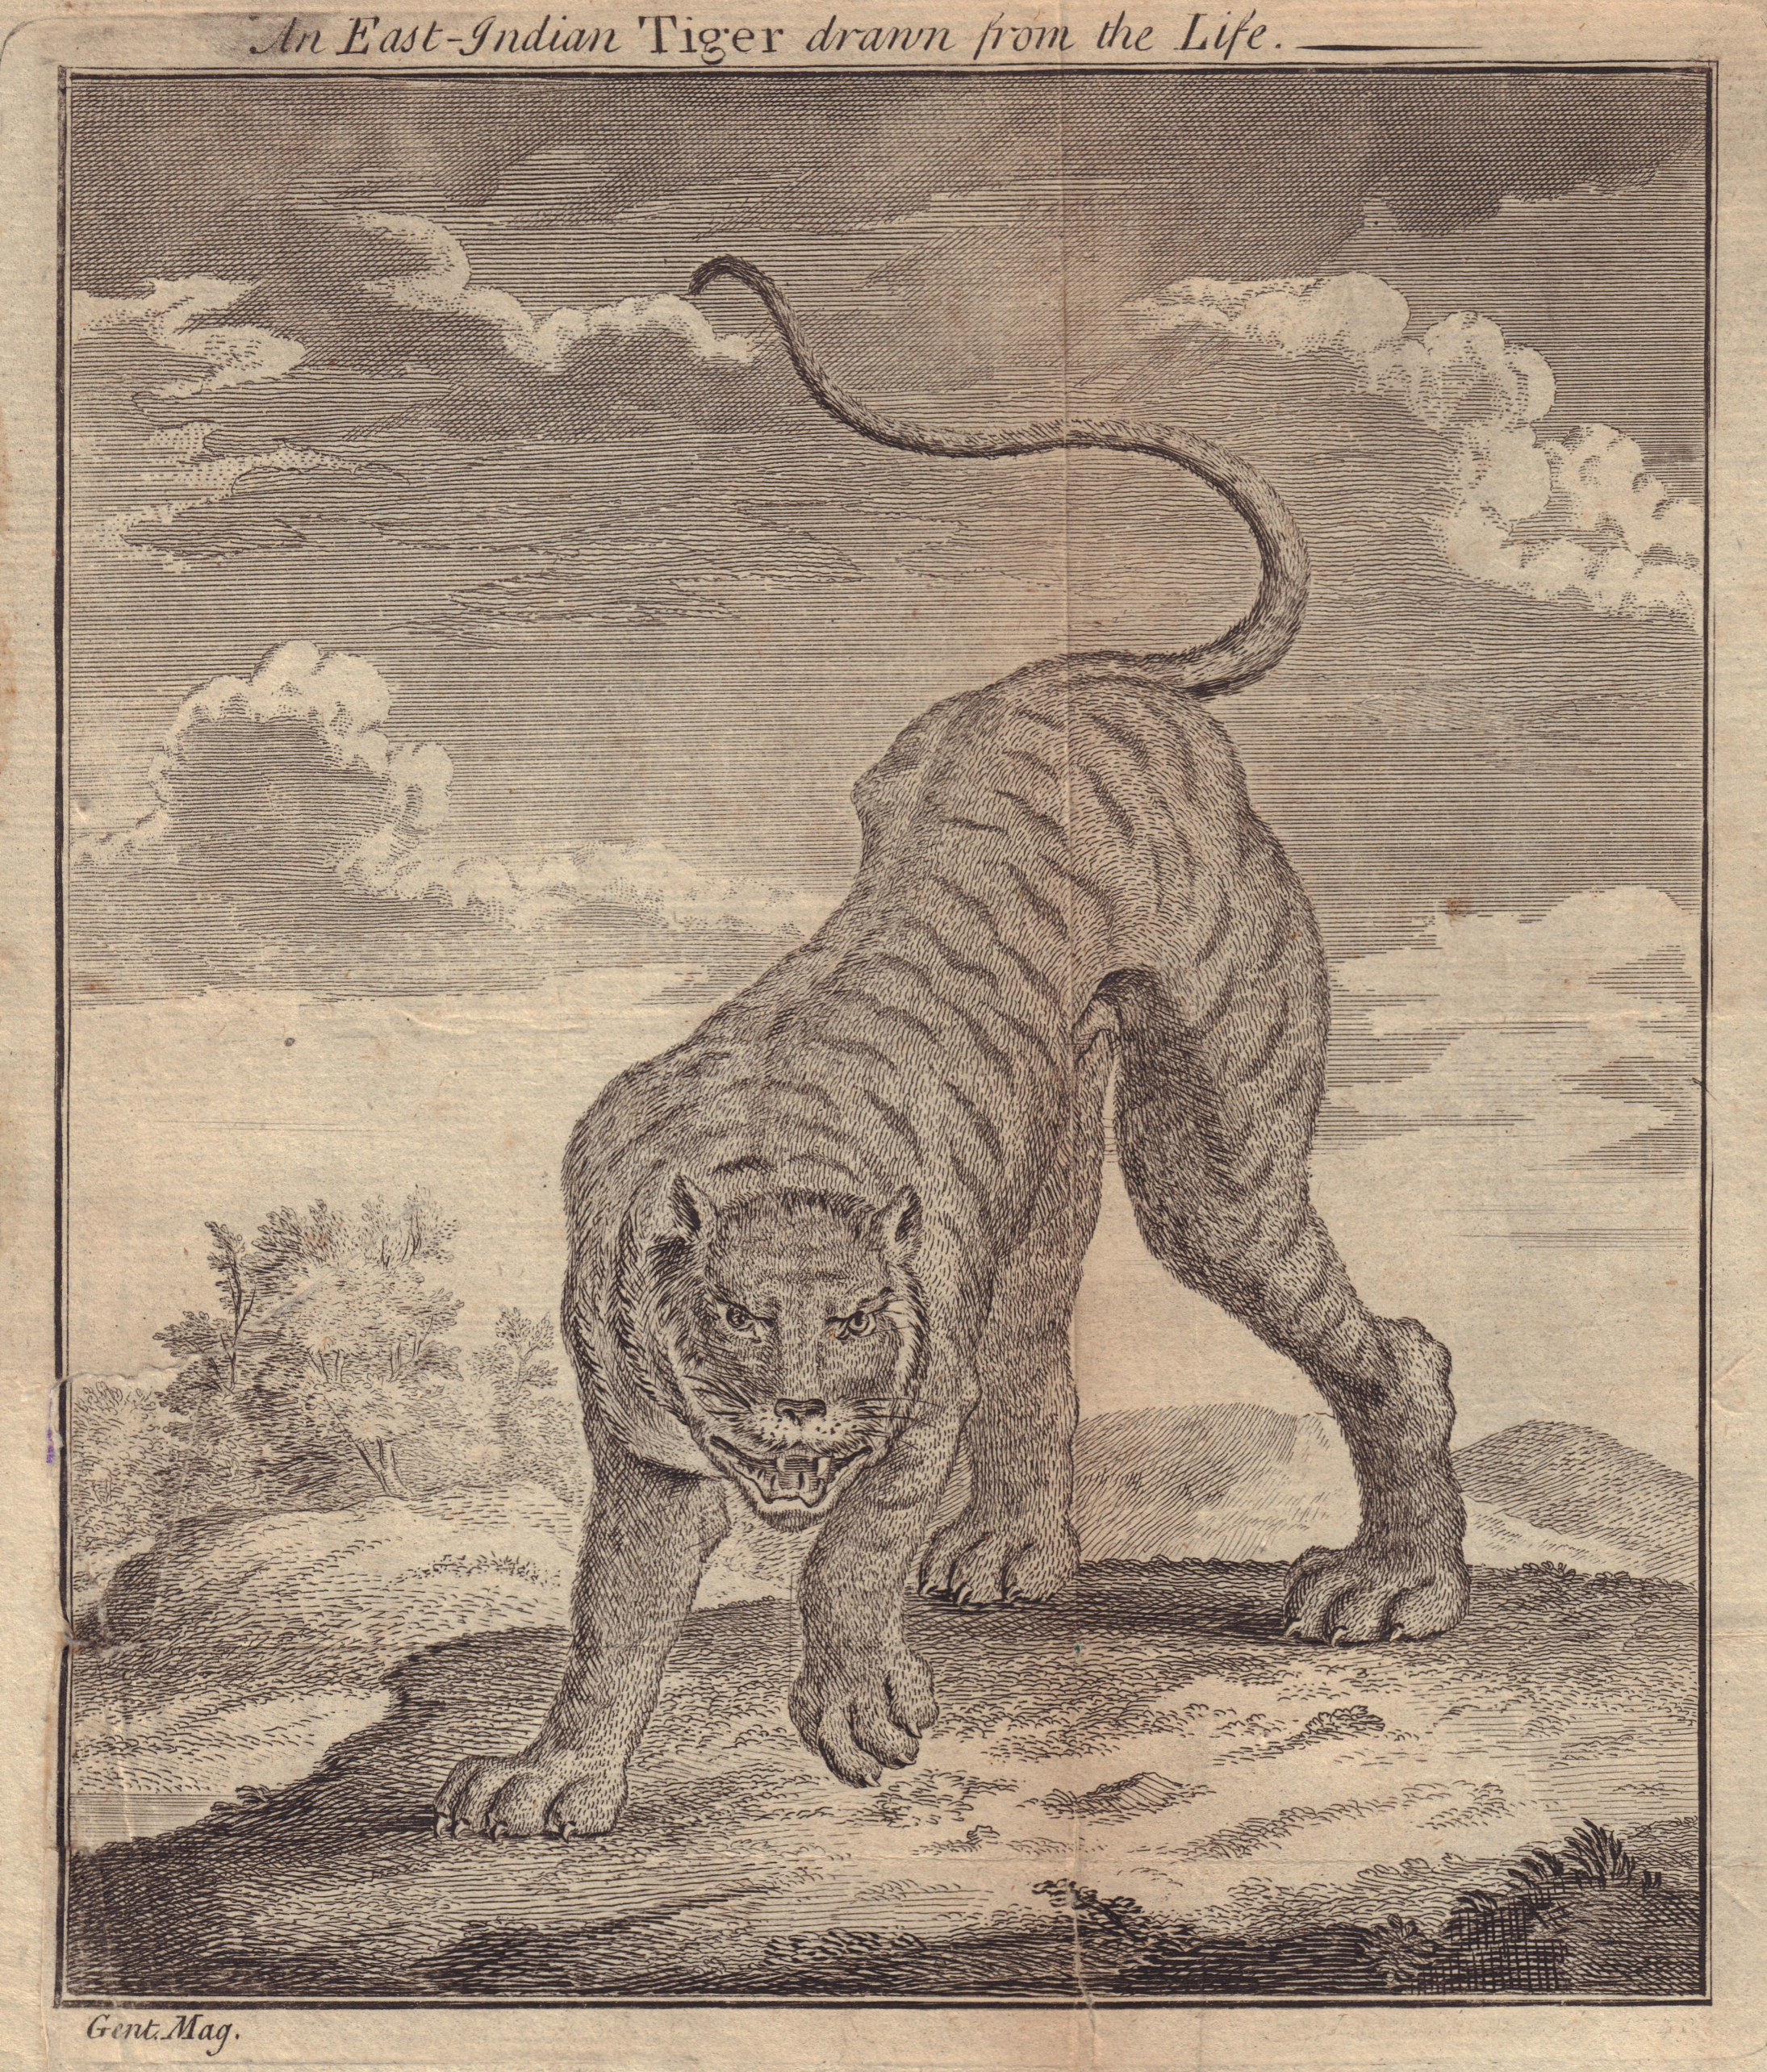 An East Indian Tiger drawn from the Life. GENTS MAG 1750 old antique print